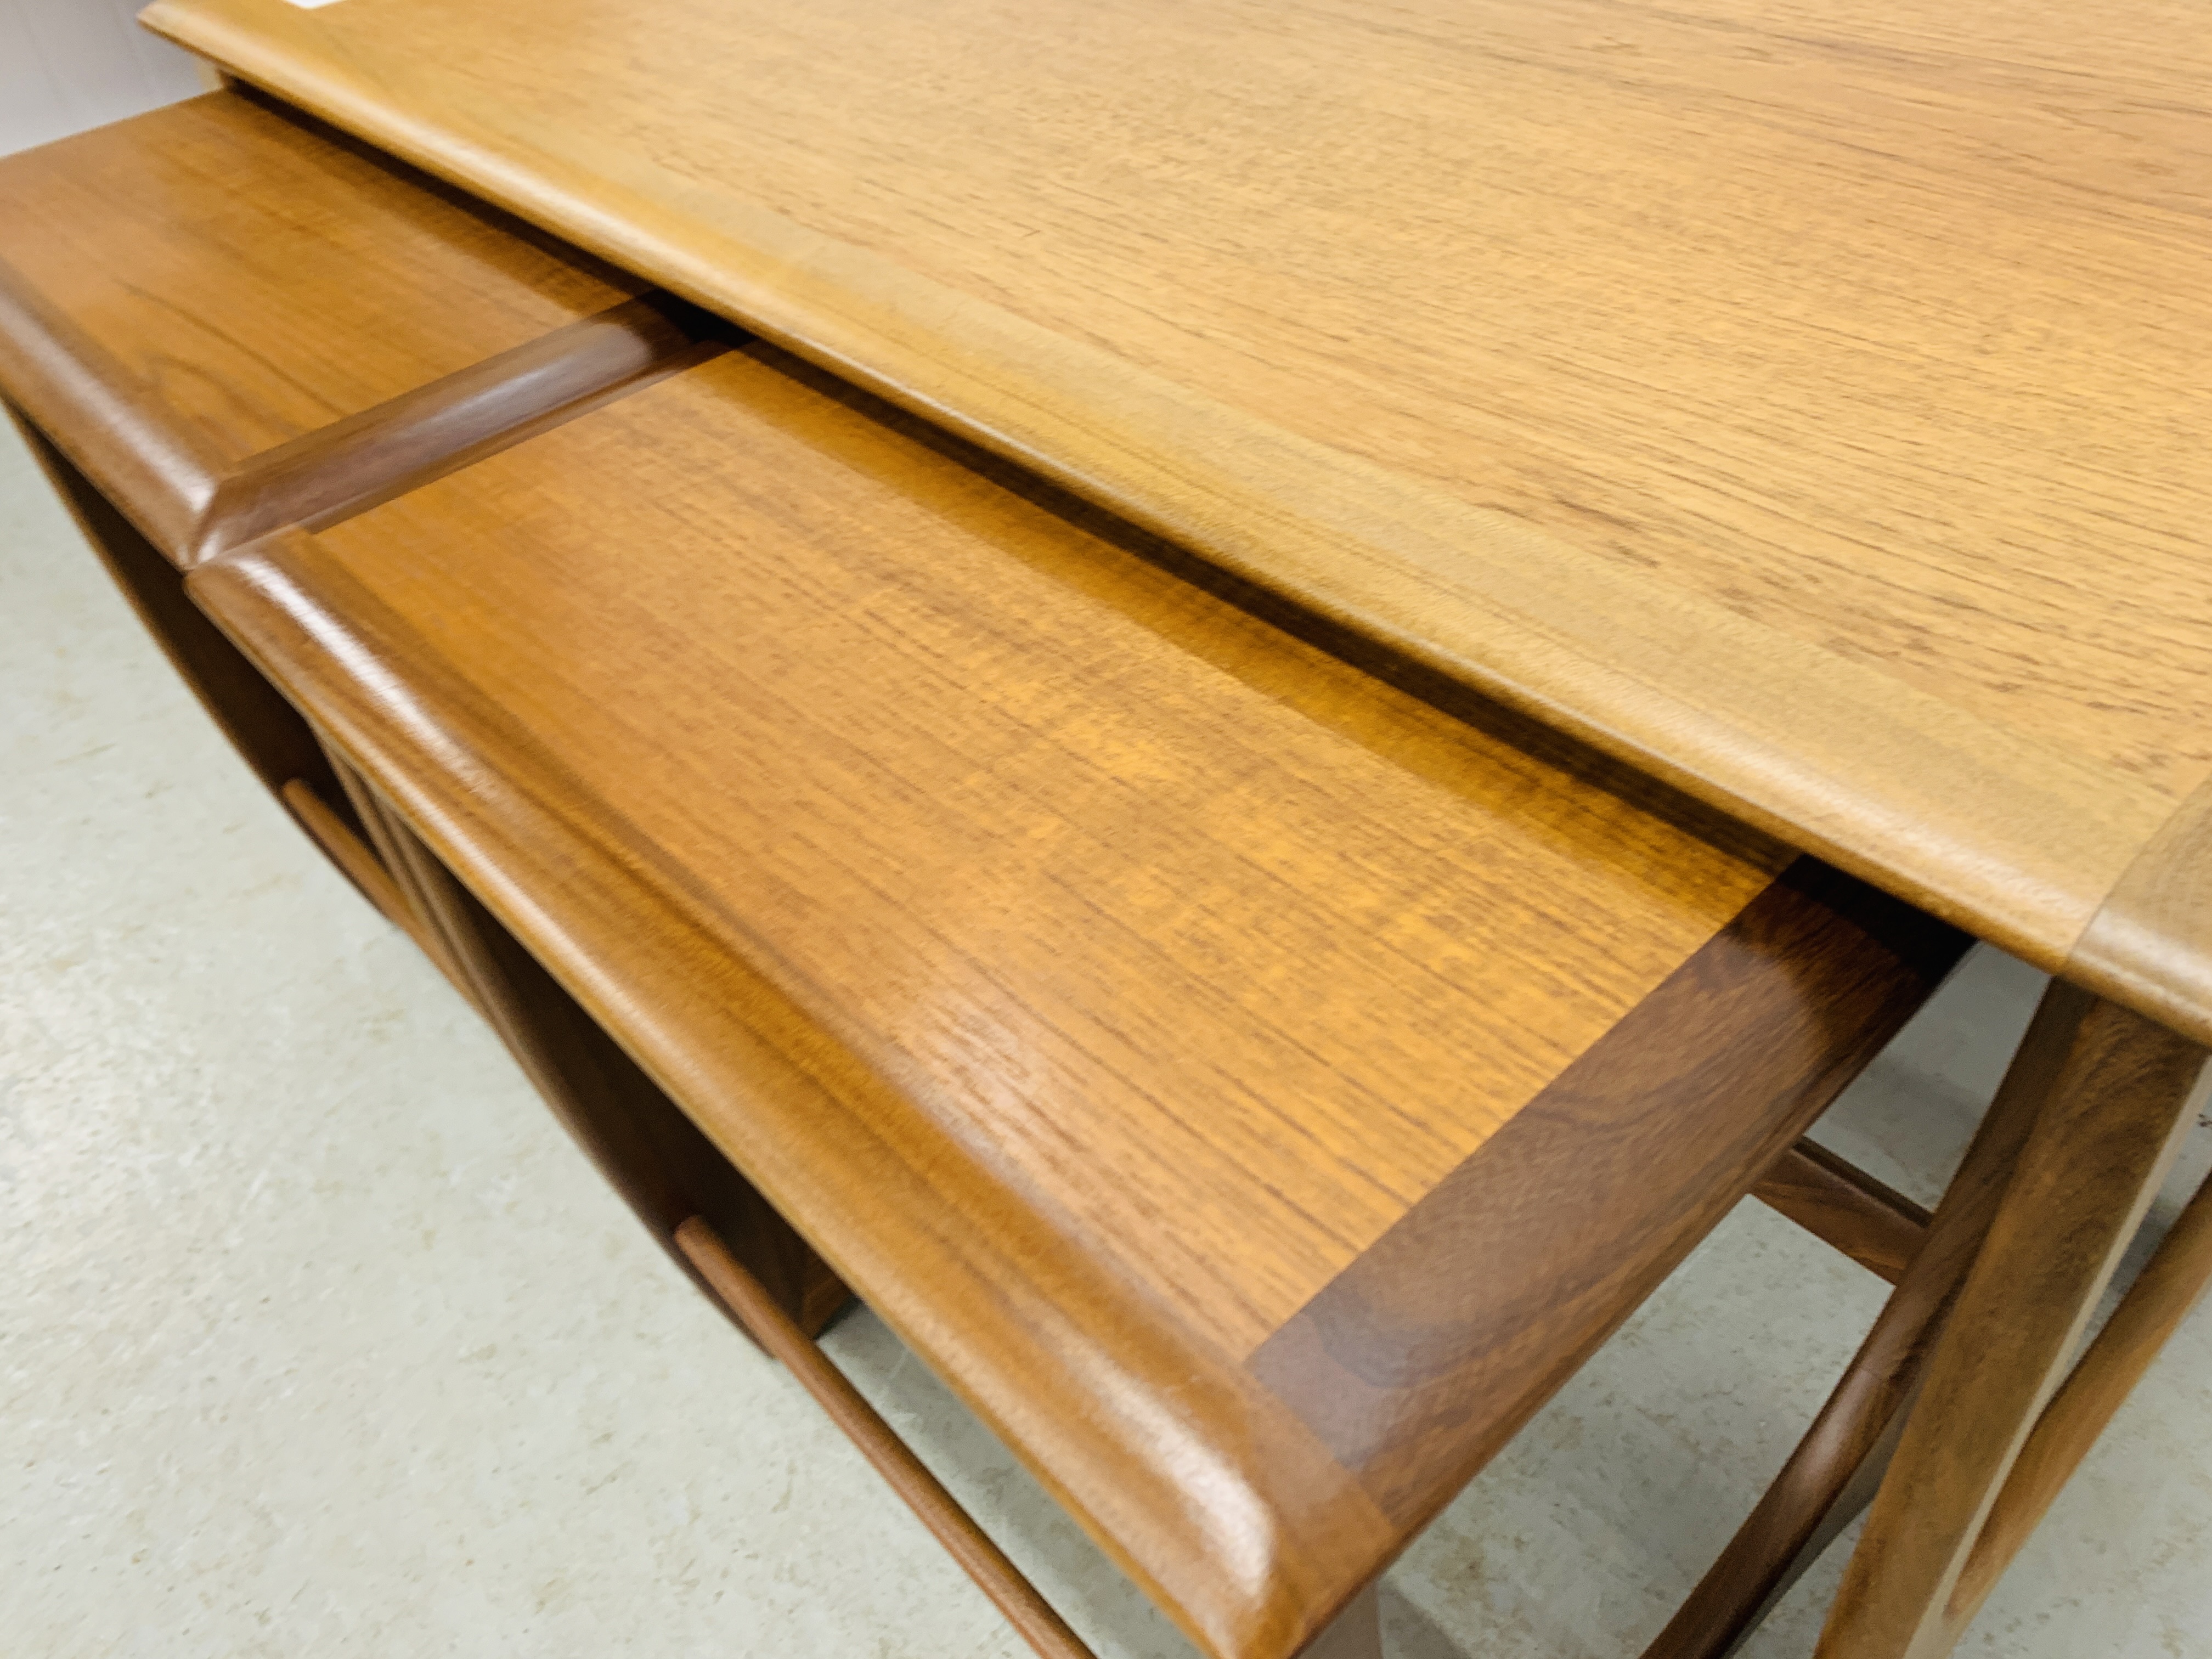 G-PLAN TEAK RECTANGULAR COFFEE TABLE WITH TWO NESTING TABLES BELOW - Image 8 of 12